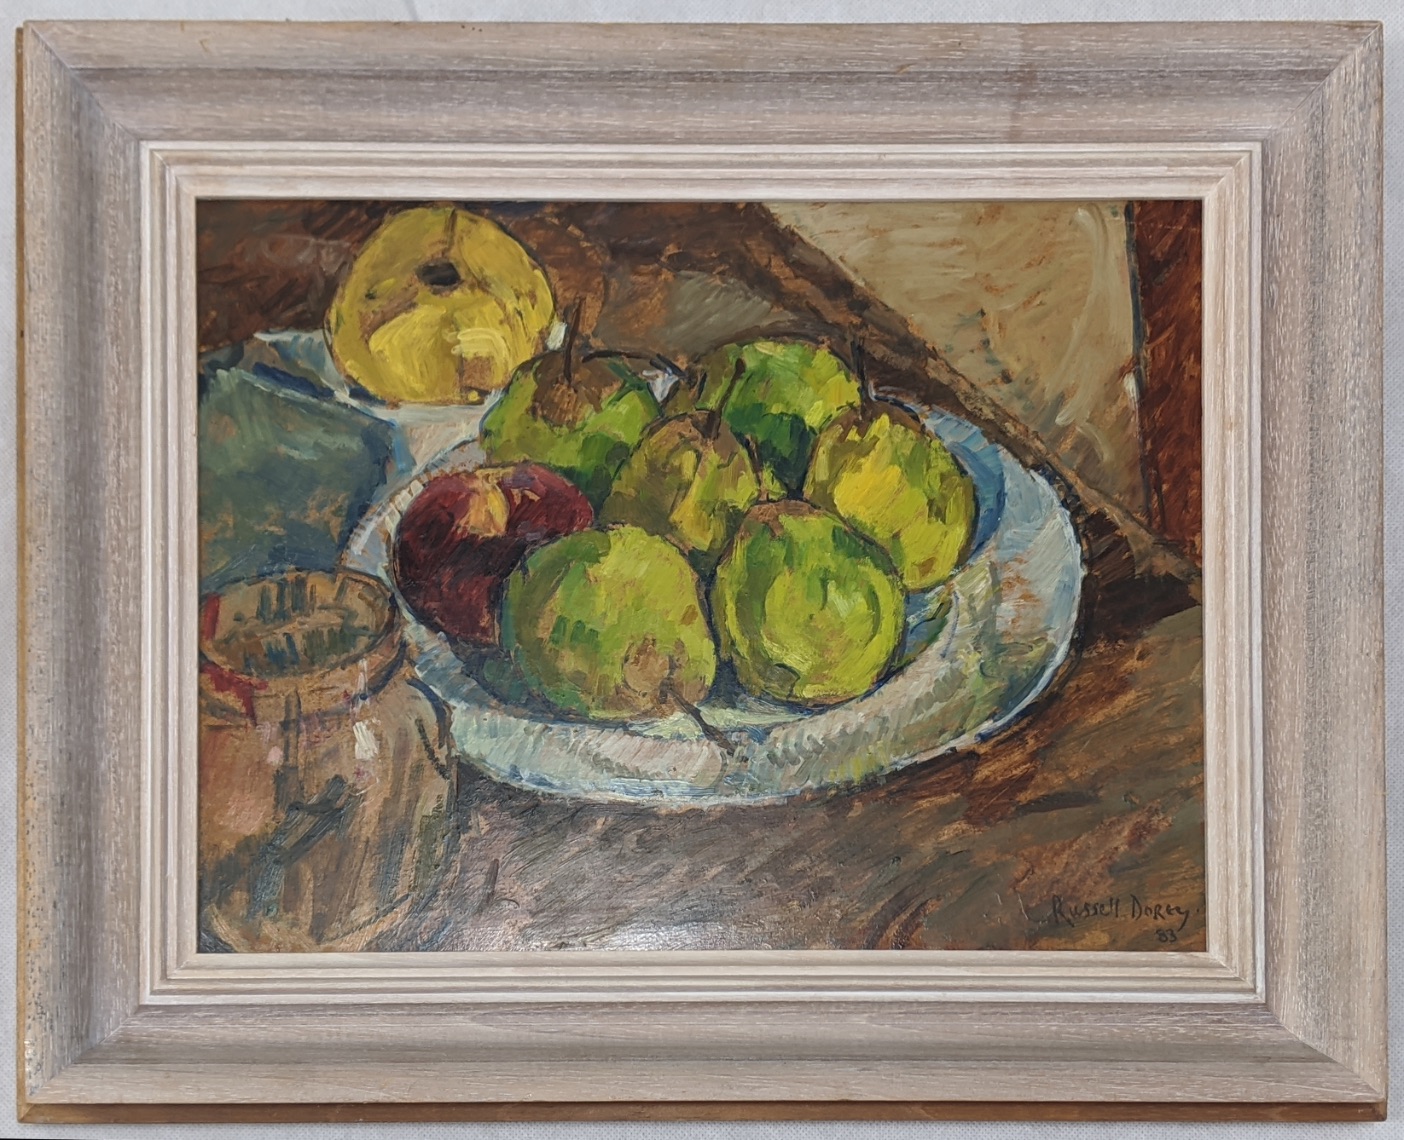 Russell Dorey (20th century British School), Still Life of Pears, 1983, oil on board, signed lower - Image 2 of 4